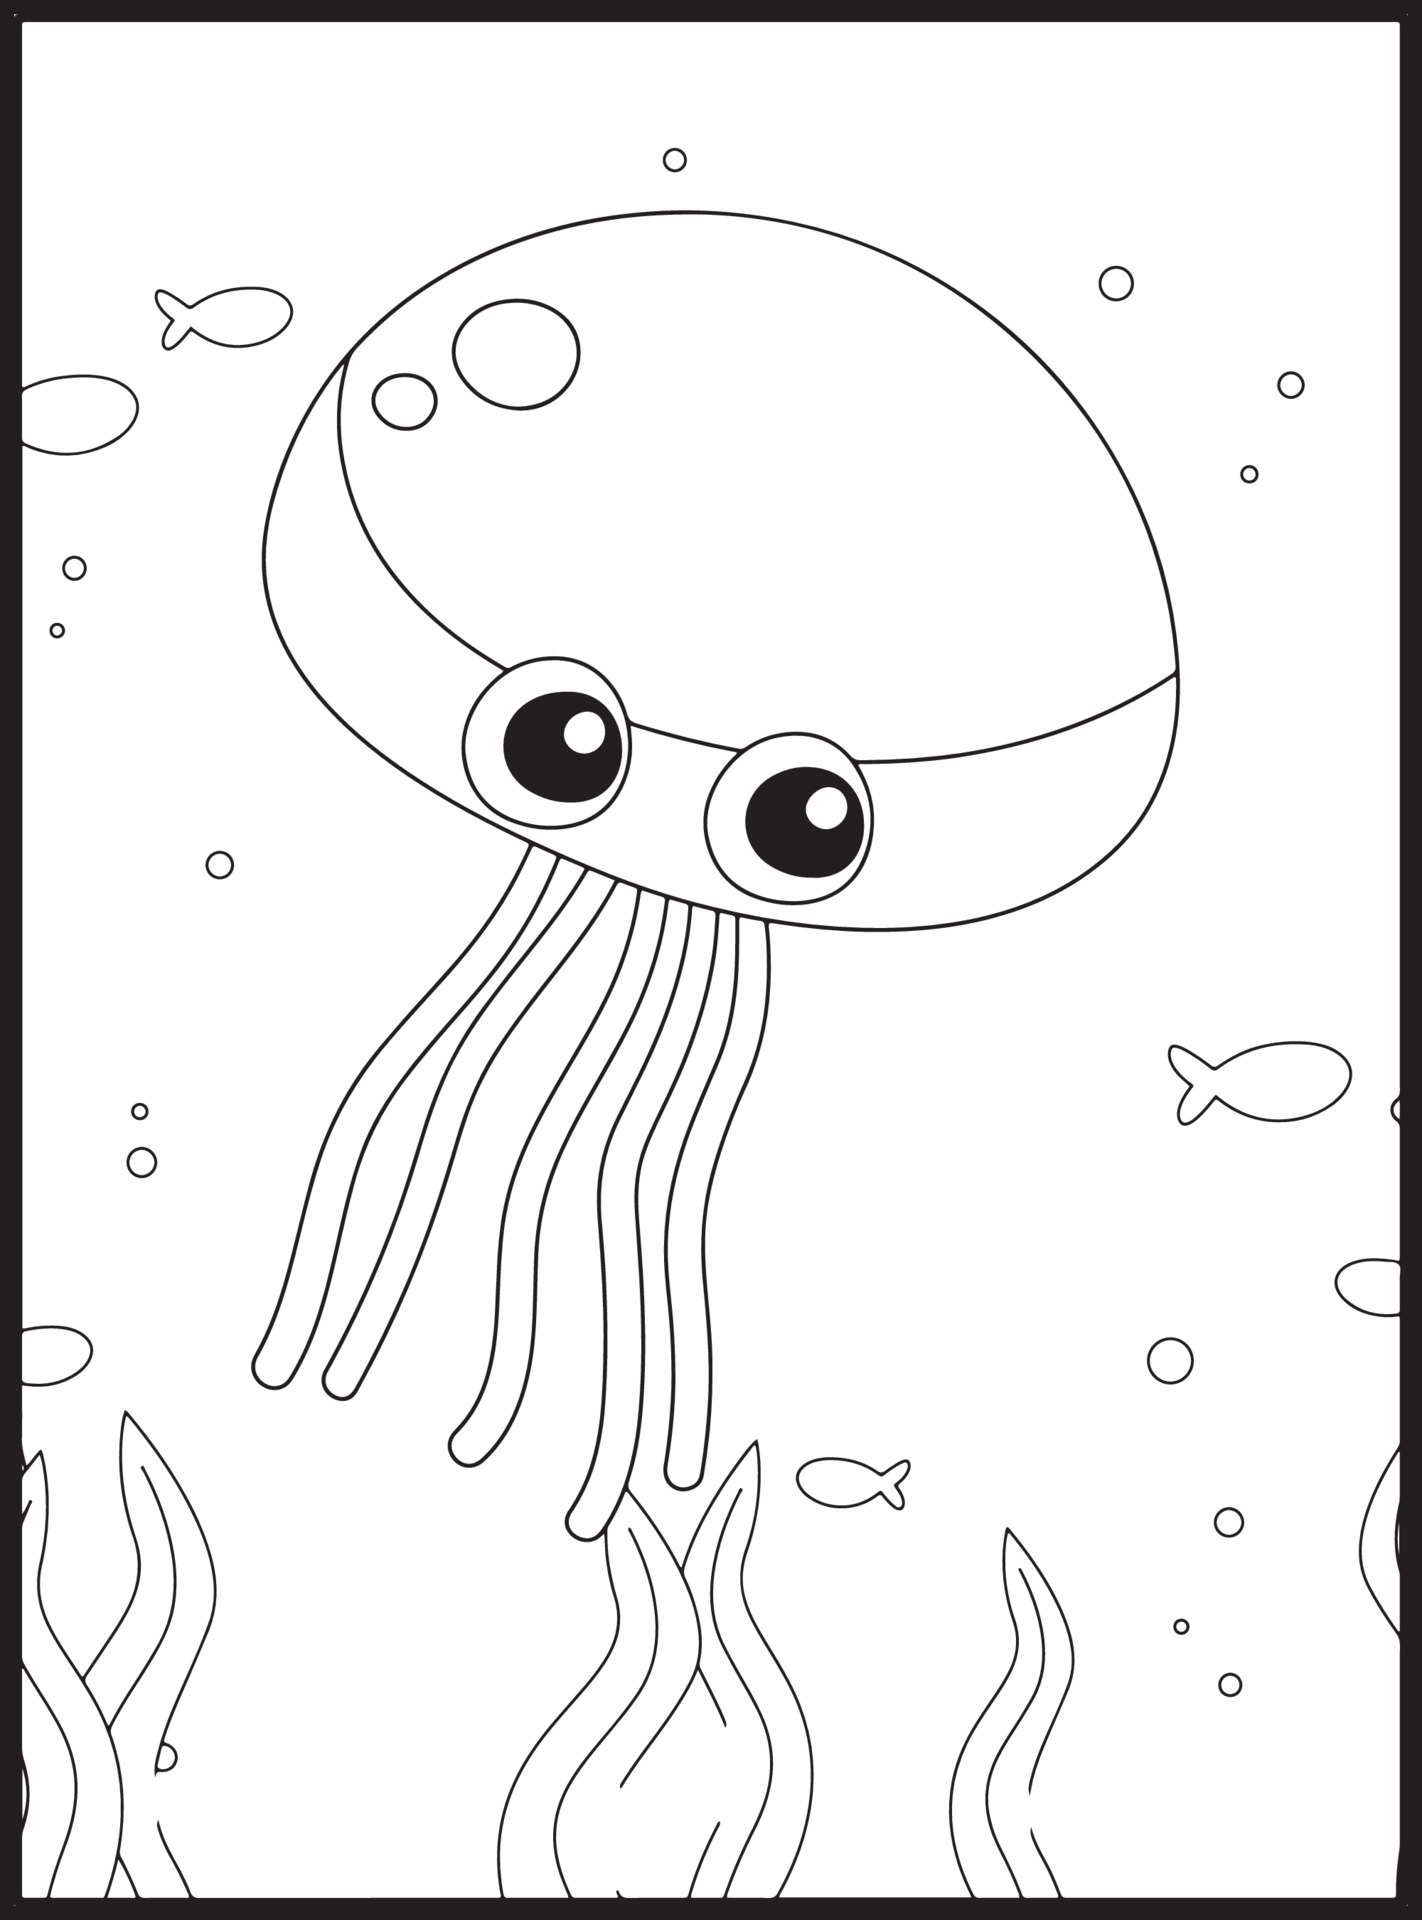 195 Jellyfish Coloring Page Designs: Underwater Beauty in Color 184